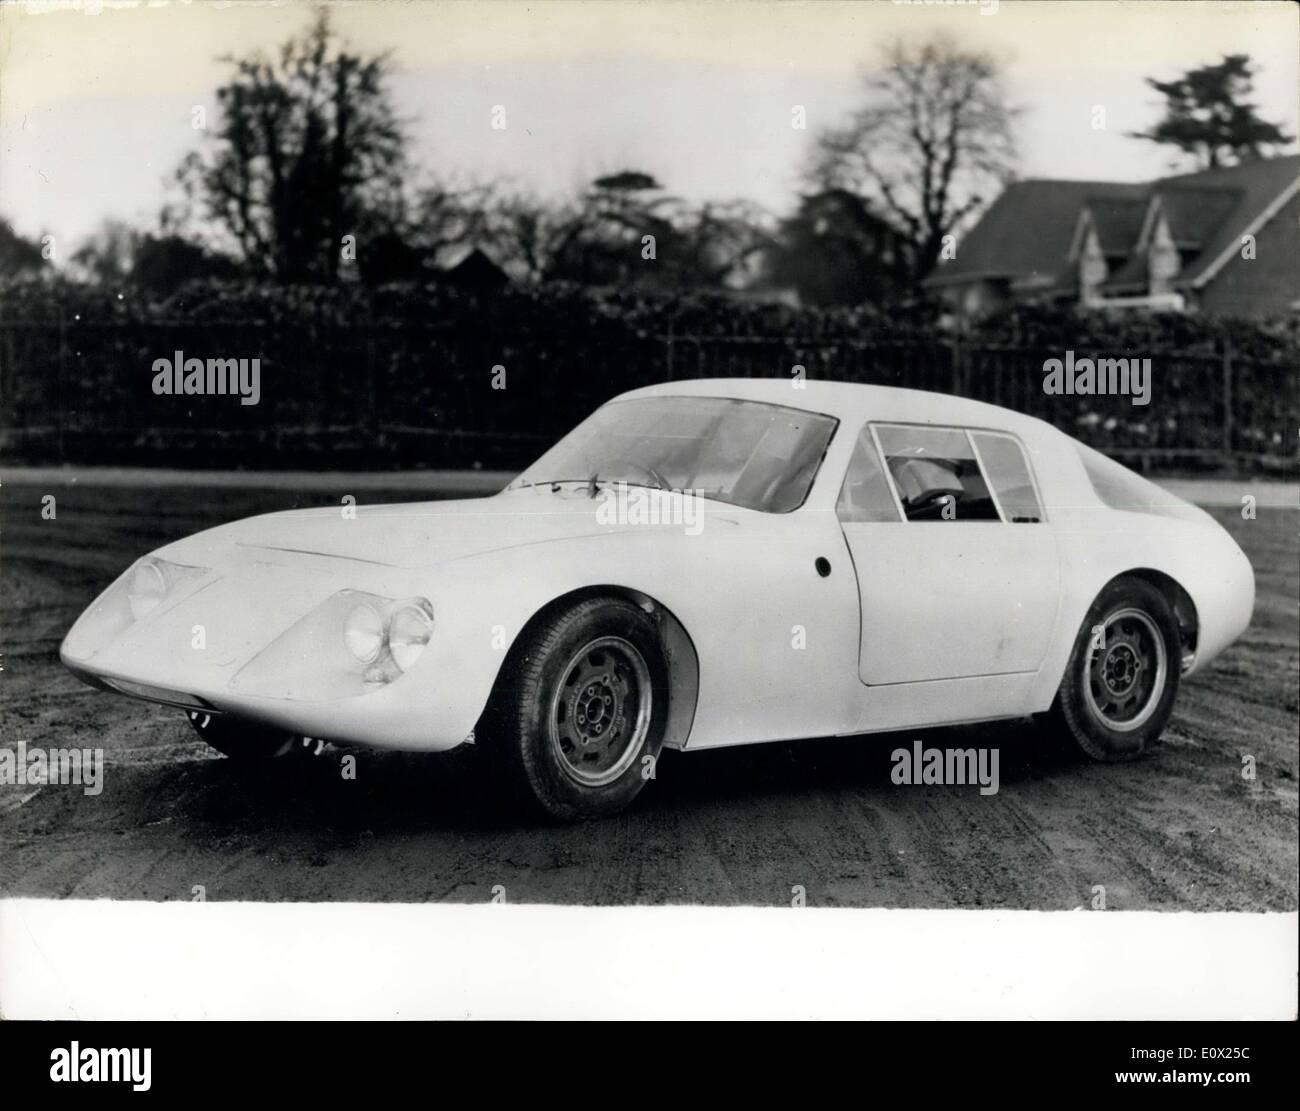 Feb. 11, 1965 - Britain Has A New Car For The Le Mans Battle... Special Bodied Lightweight Austin Healey Sprite. Britain's first challenger of the 1965 Le Mans 24 Hour race in June - is the new Special bodied lightweight Austin-Healey Sprite - built by the Donald Healey Company at Warwick. The car is to have tests on the Silverstone circuit - and the Warwickshire high speed track of the Motor Industry Research Association. Two of the prototypes will be entered at Le Mans Stock Photo